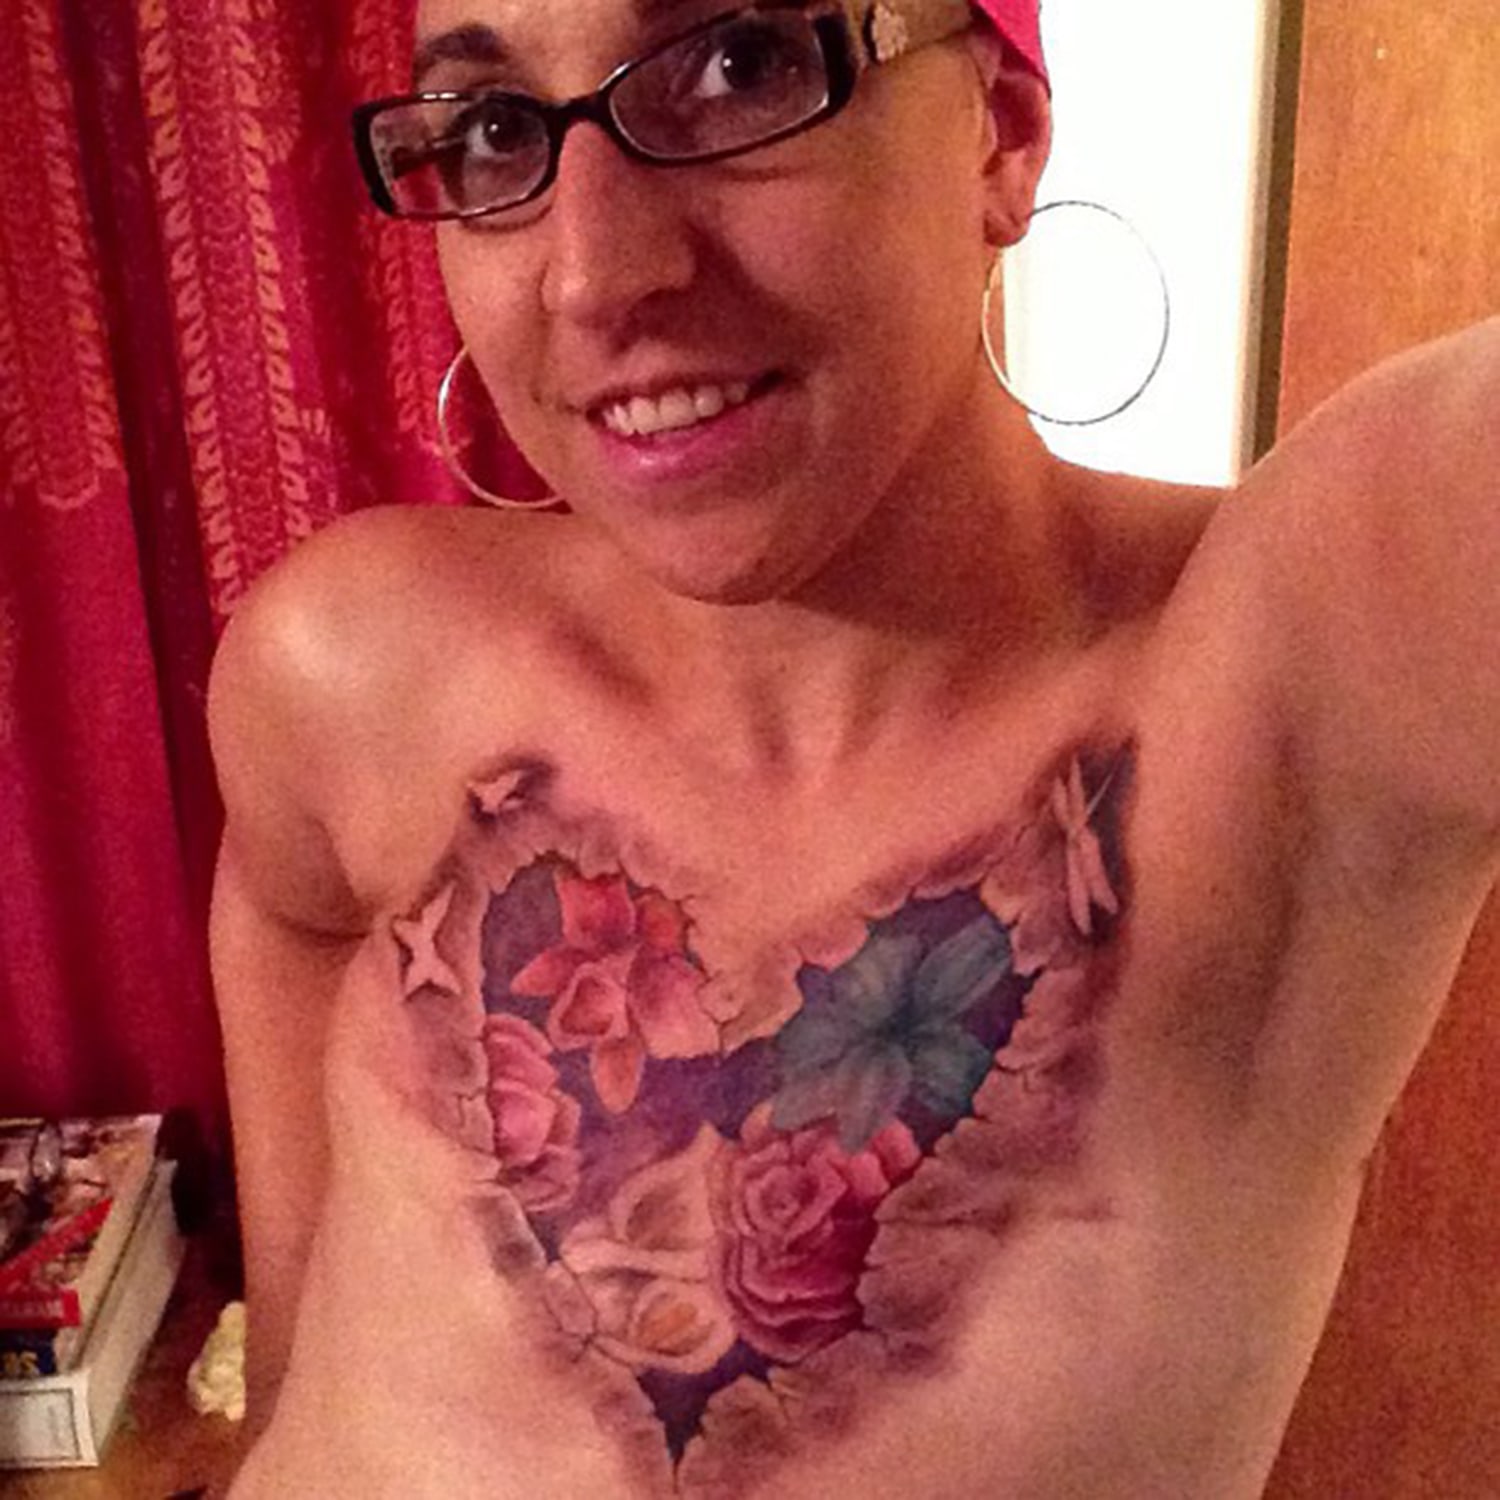 Flat and fabulous Topless tattoo selfie inspires cancer survivors image